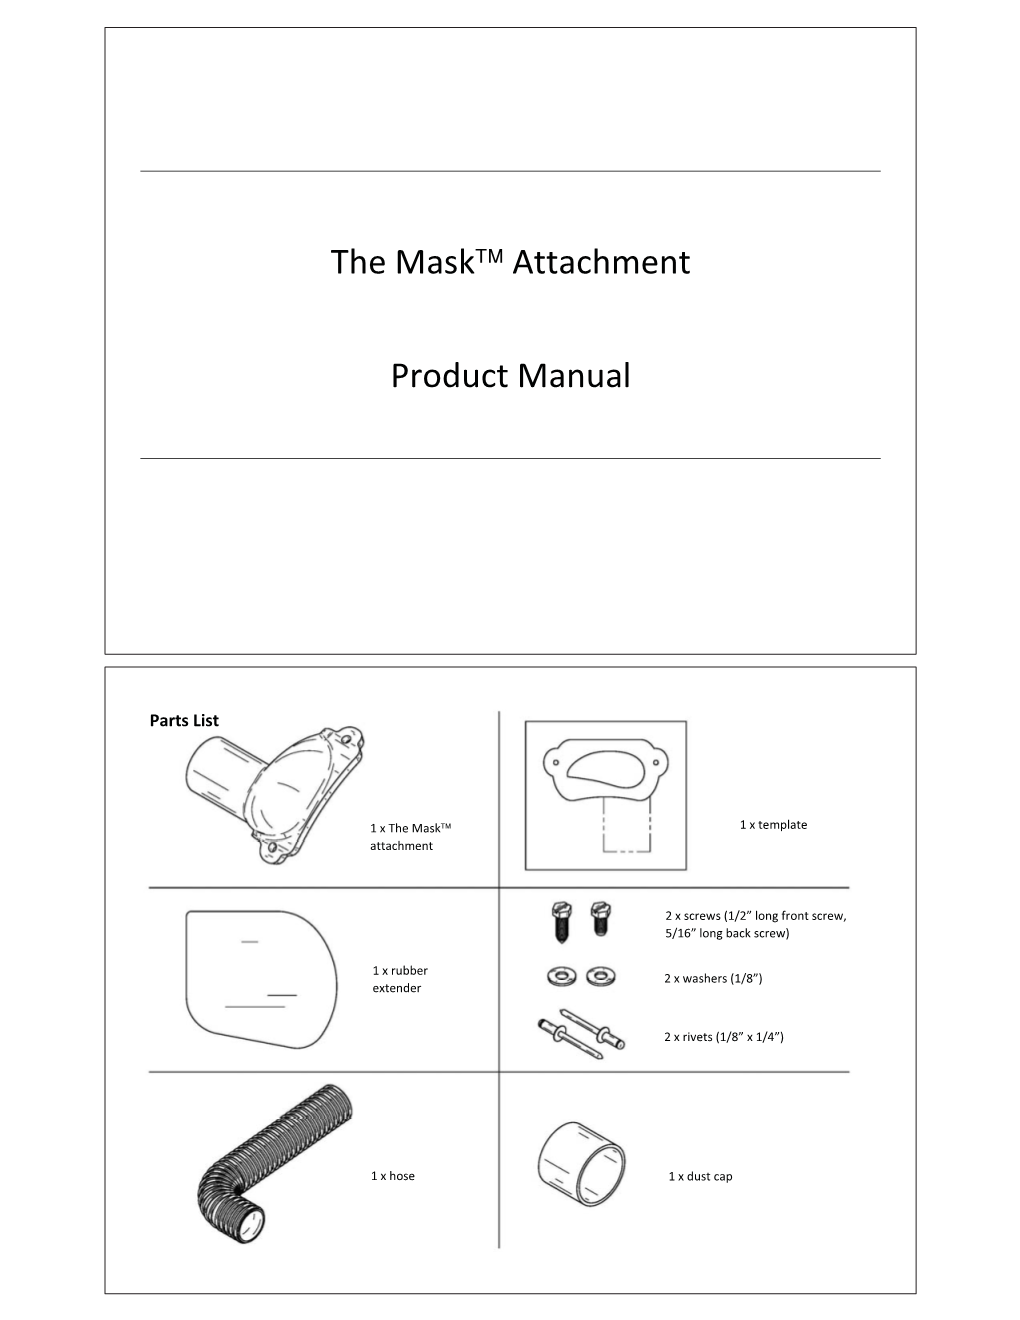 The Mask¥ Attachment Product Manual